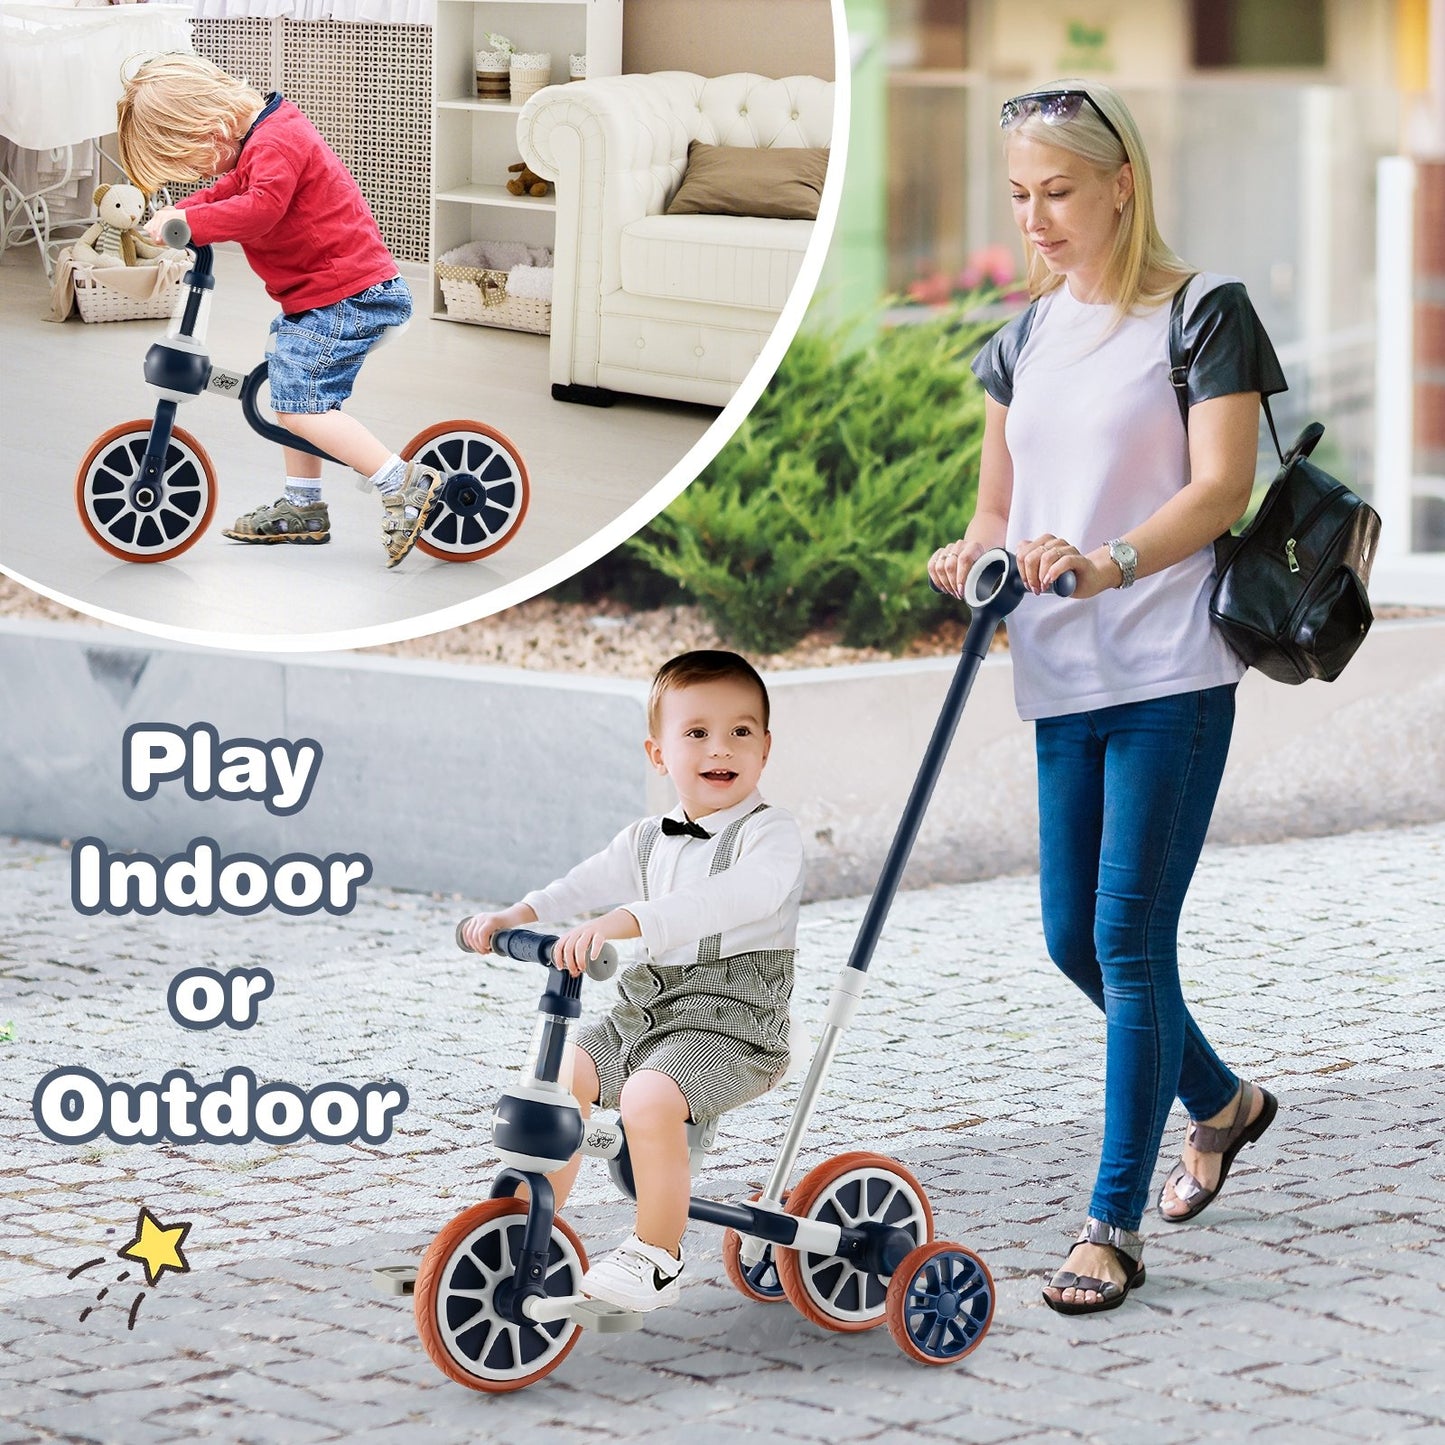 4-in-1 Kids Trike Bike with Adjustable Parent Push Handle and Seat Height, Navy